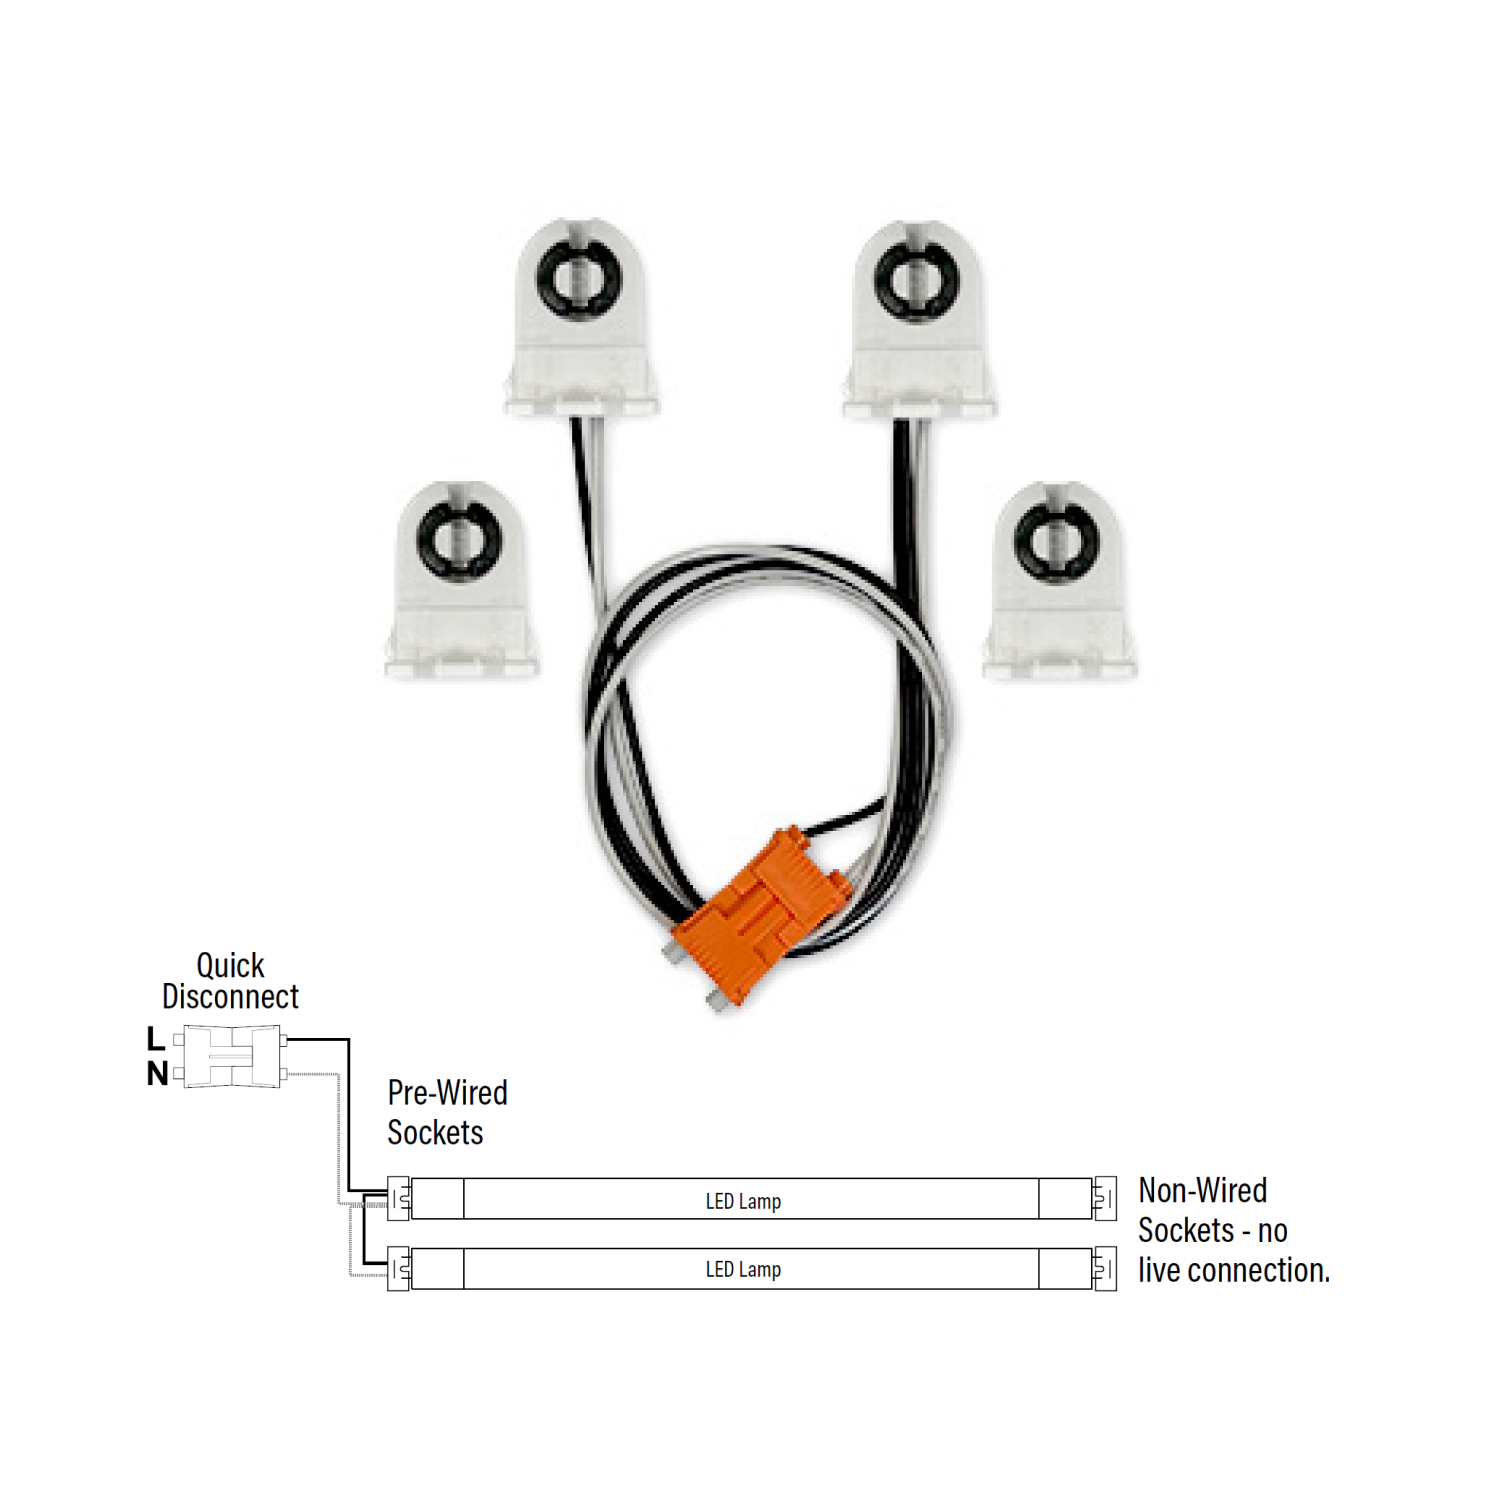 Wiring Harness for Single-End, Non-Shunted Tombstones, T8/T12 Socket